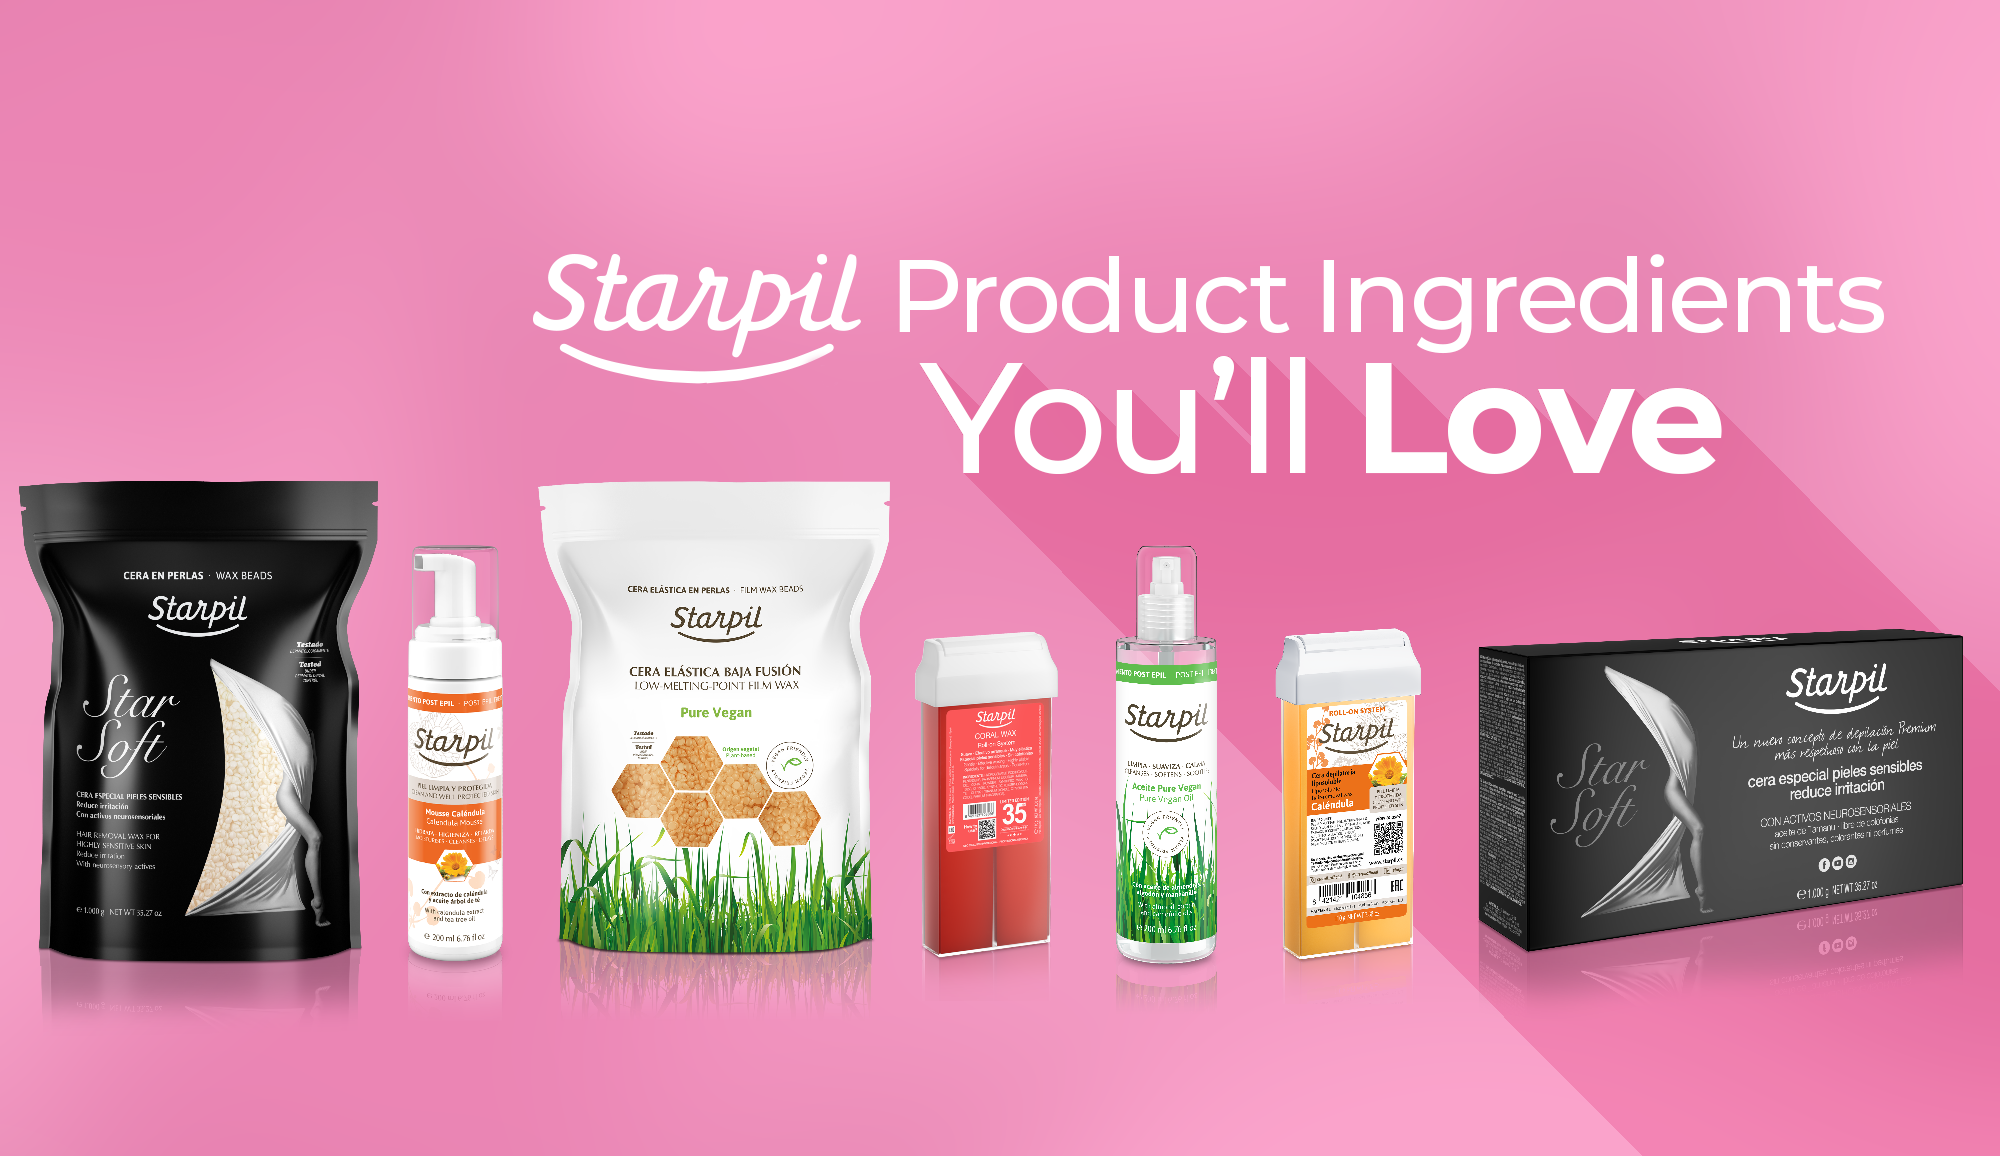 Starpil Wax Product Ingredients You'll Love